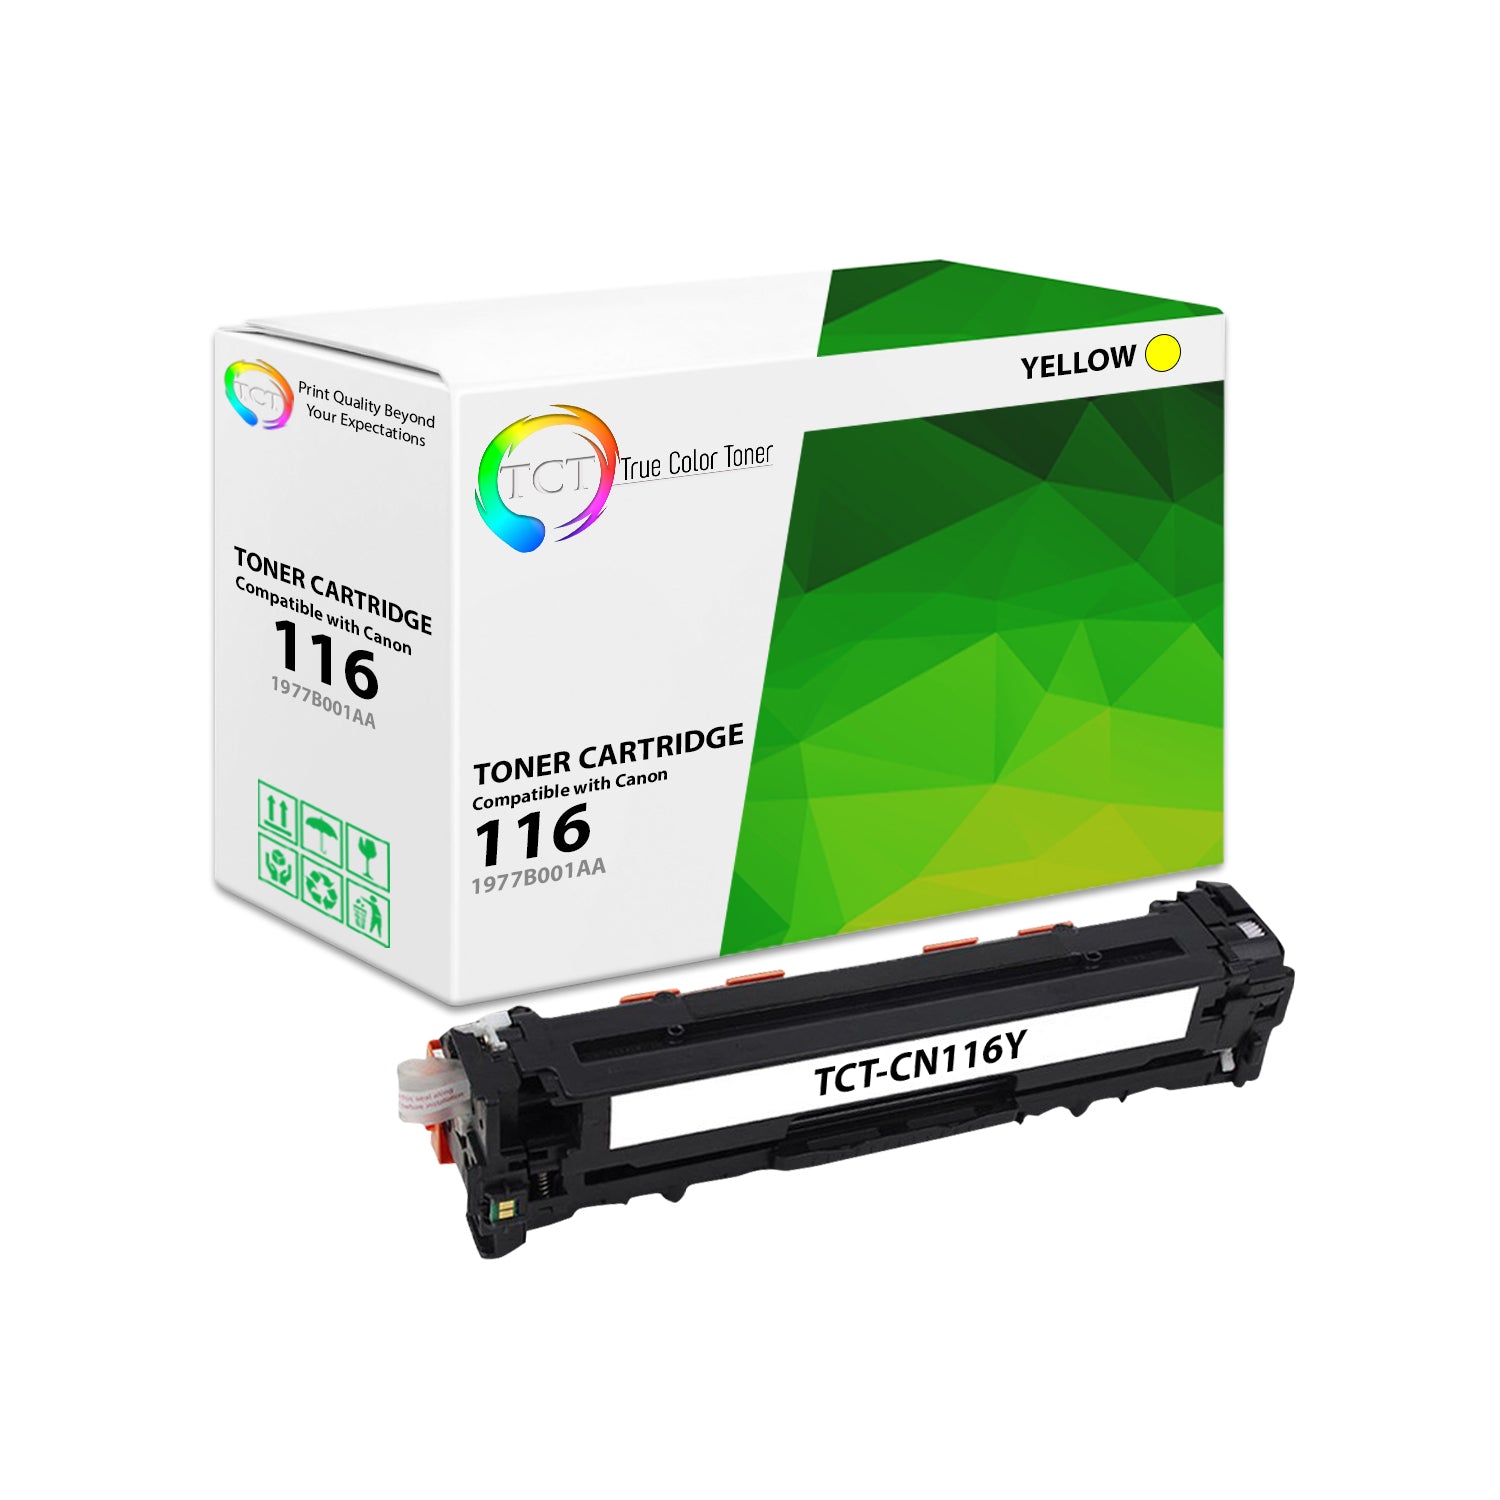 TCT Compatible Toner Cartridge Replacement for the Canon 116 Series - 1 Pack Yellow